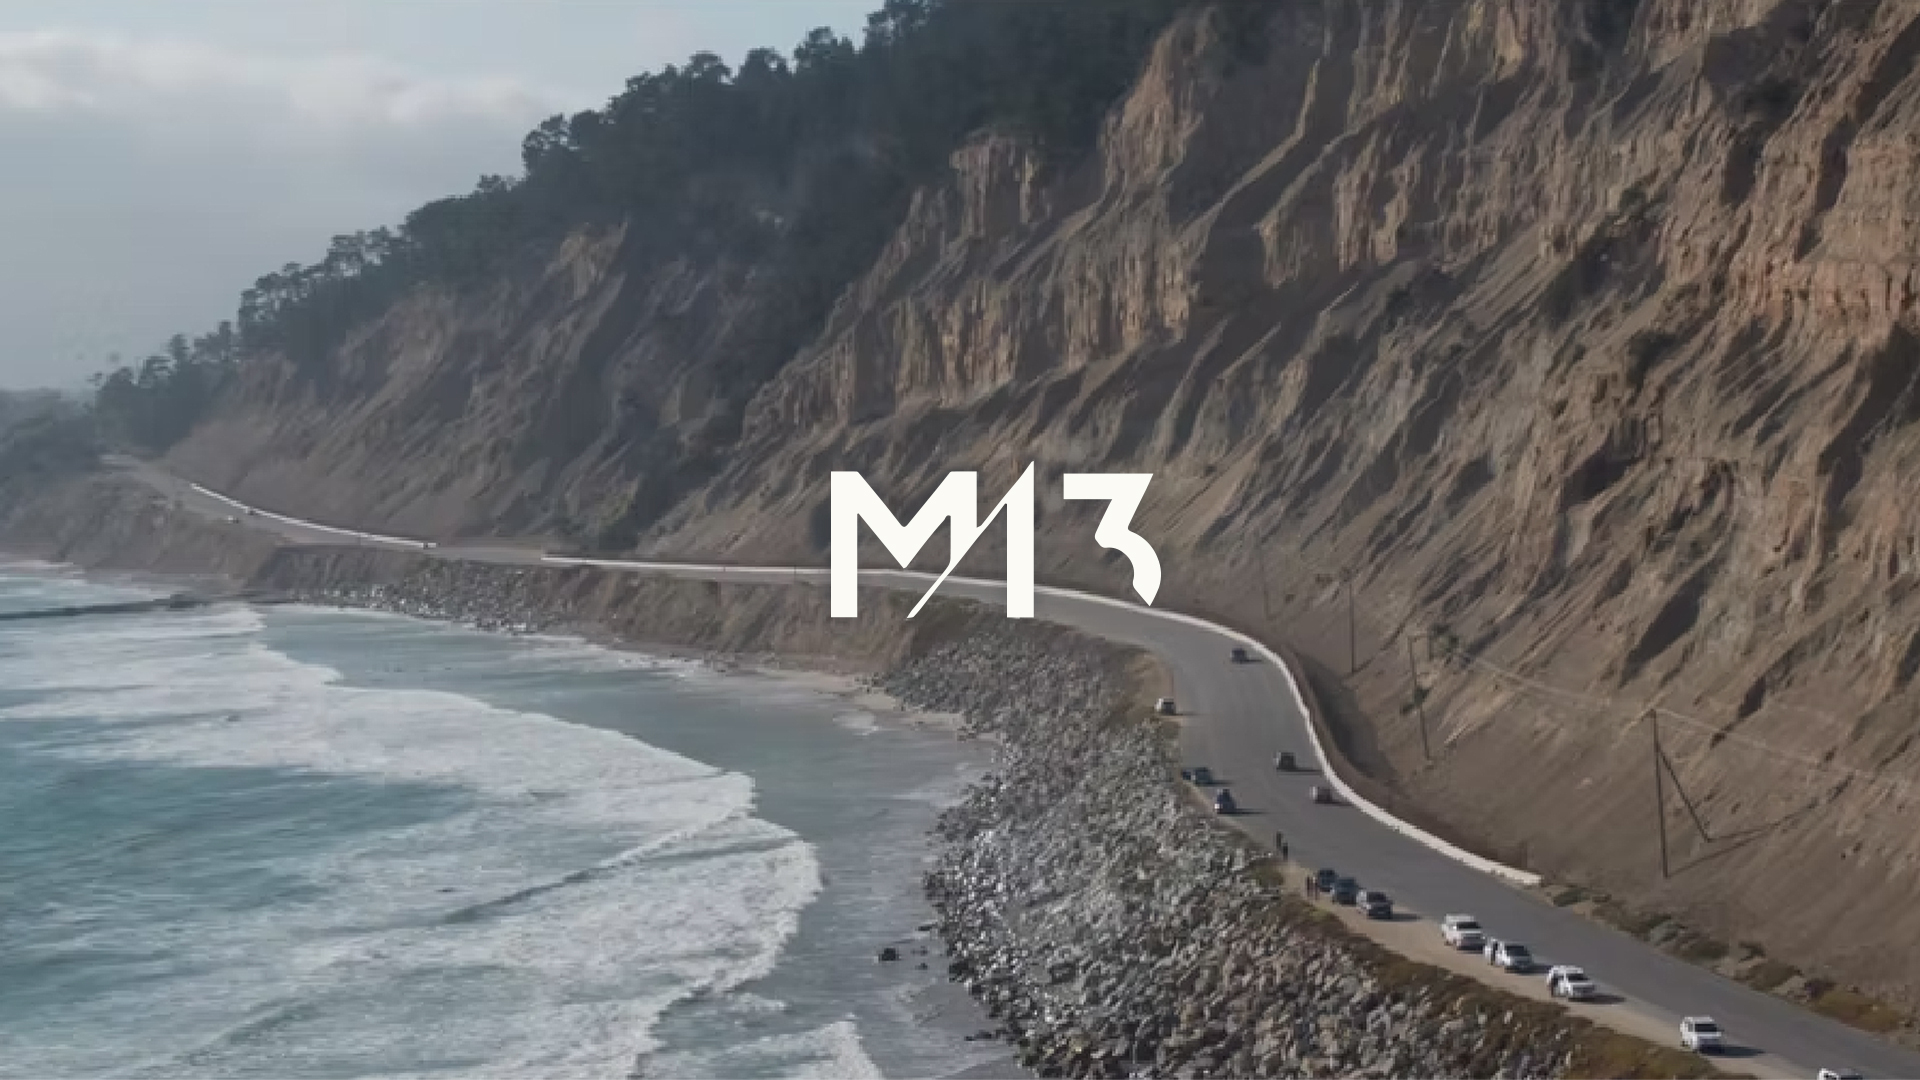 Don’t just take it from us. Hear what our founders are saying about M13.